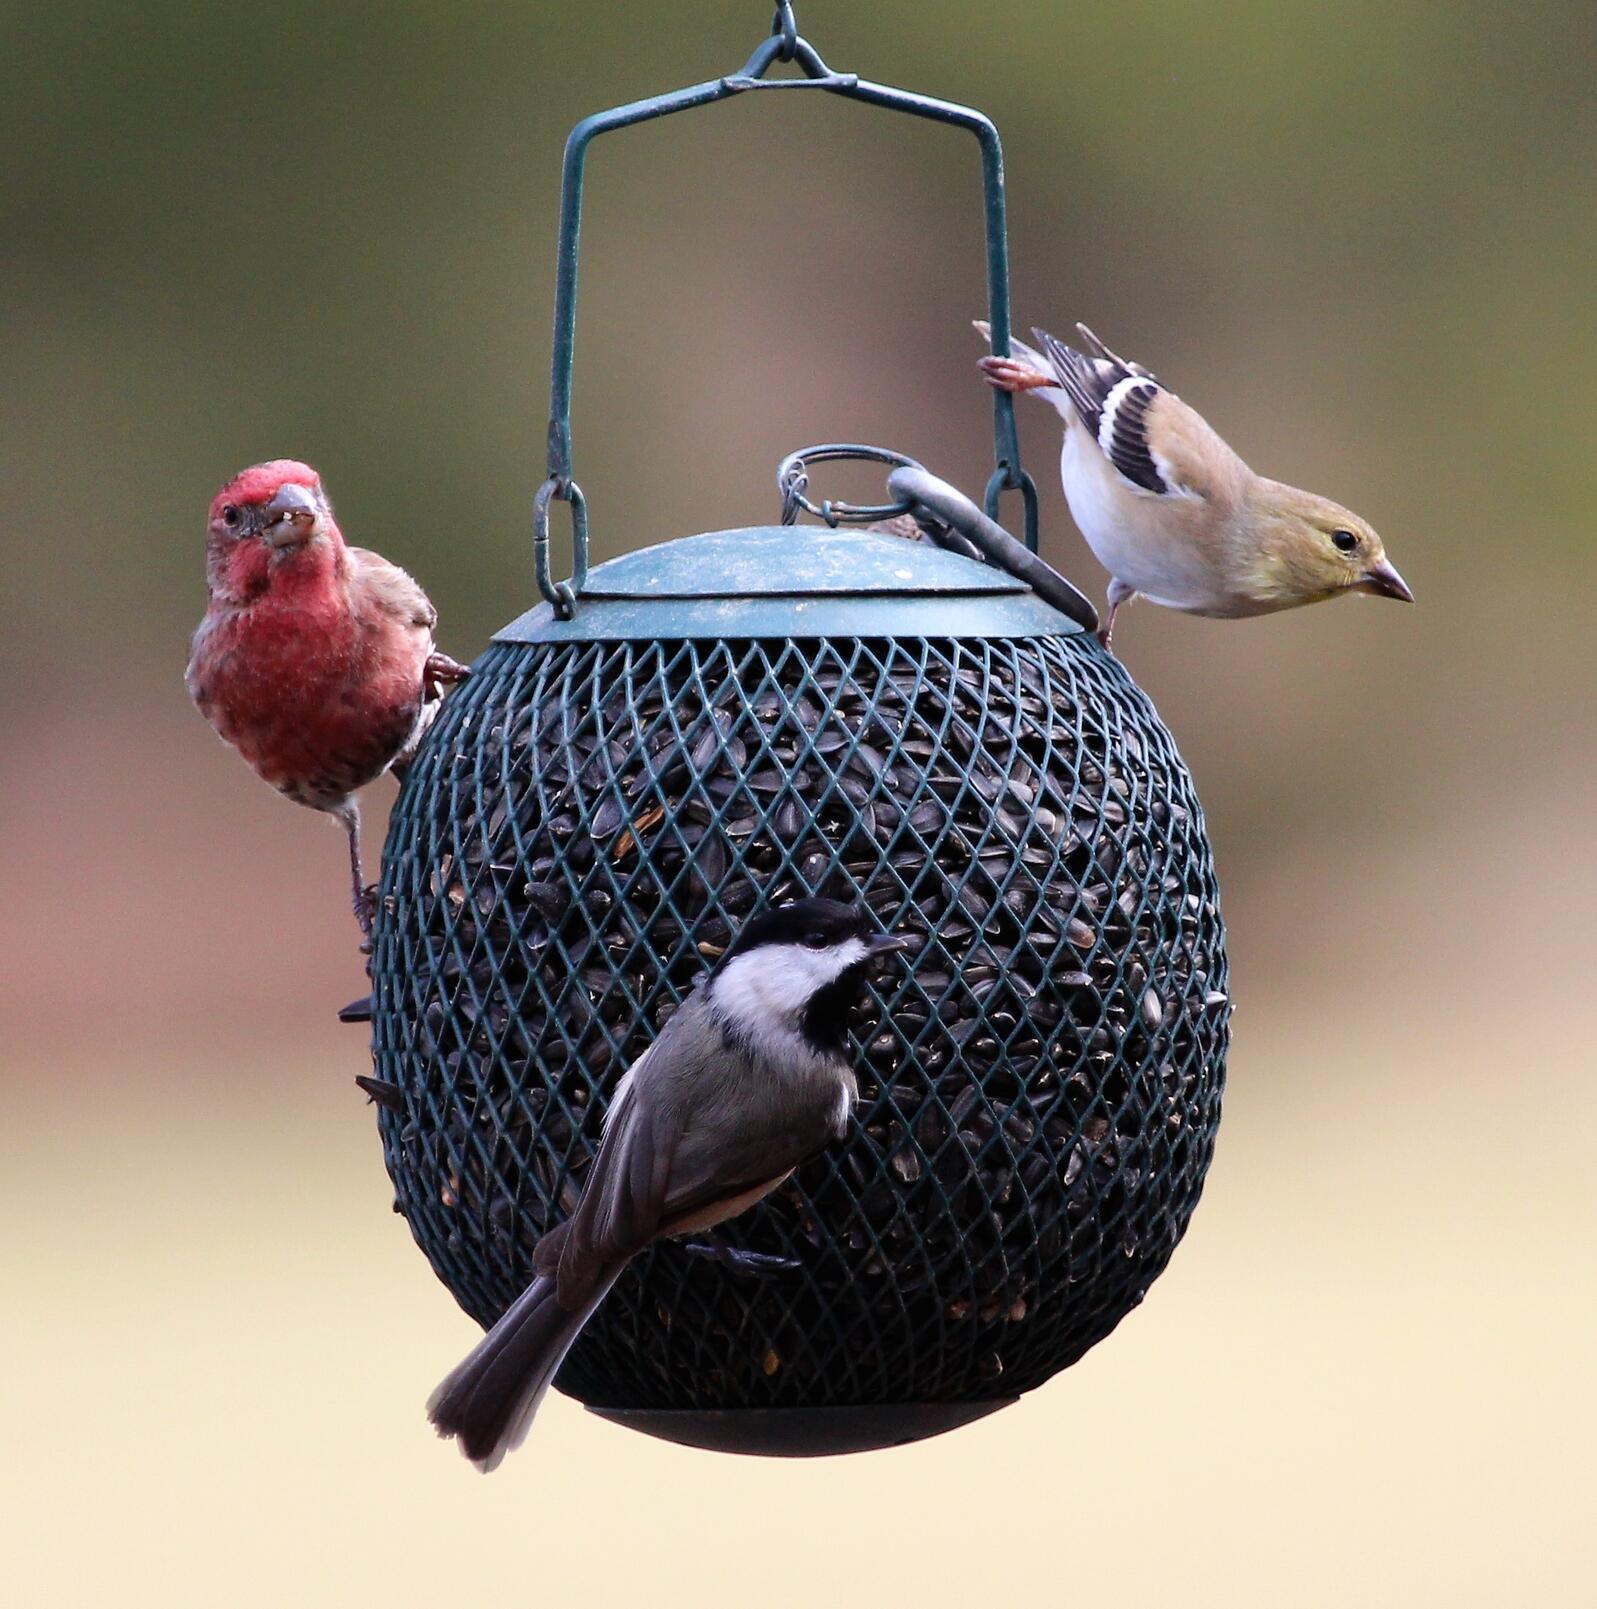 American Goldfinch, House Finch, and Black-capped Chickadee on a birdfeeder.